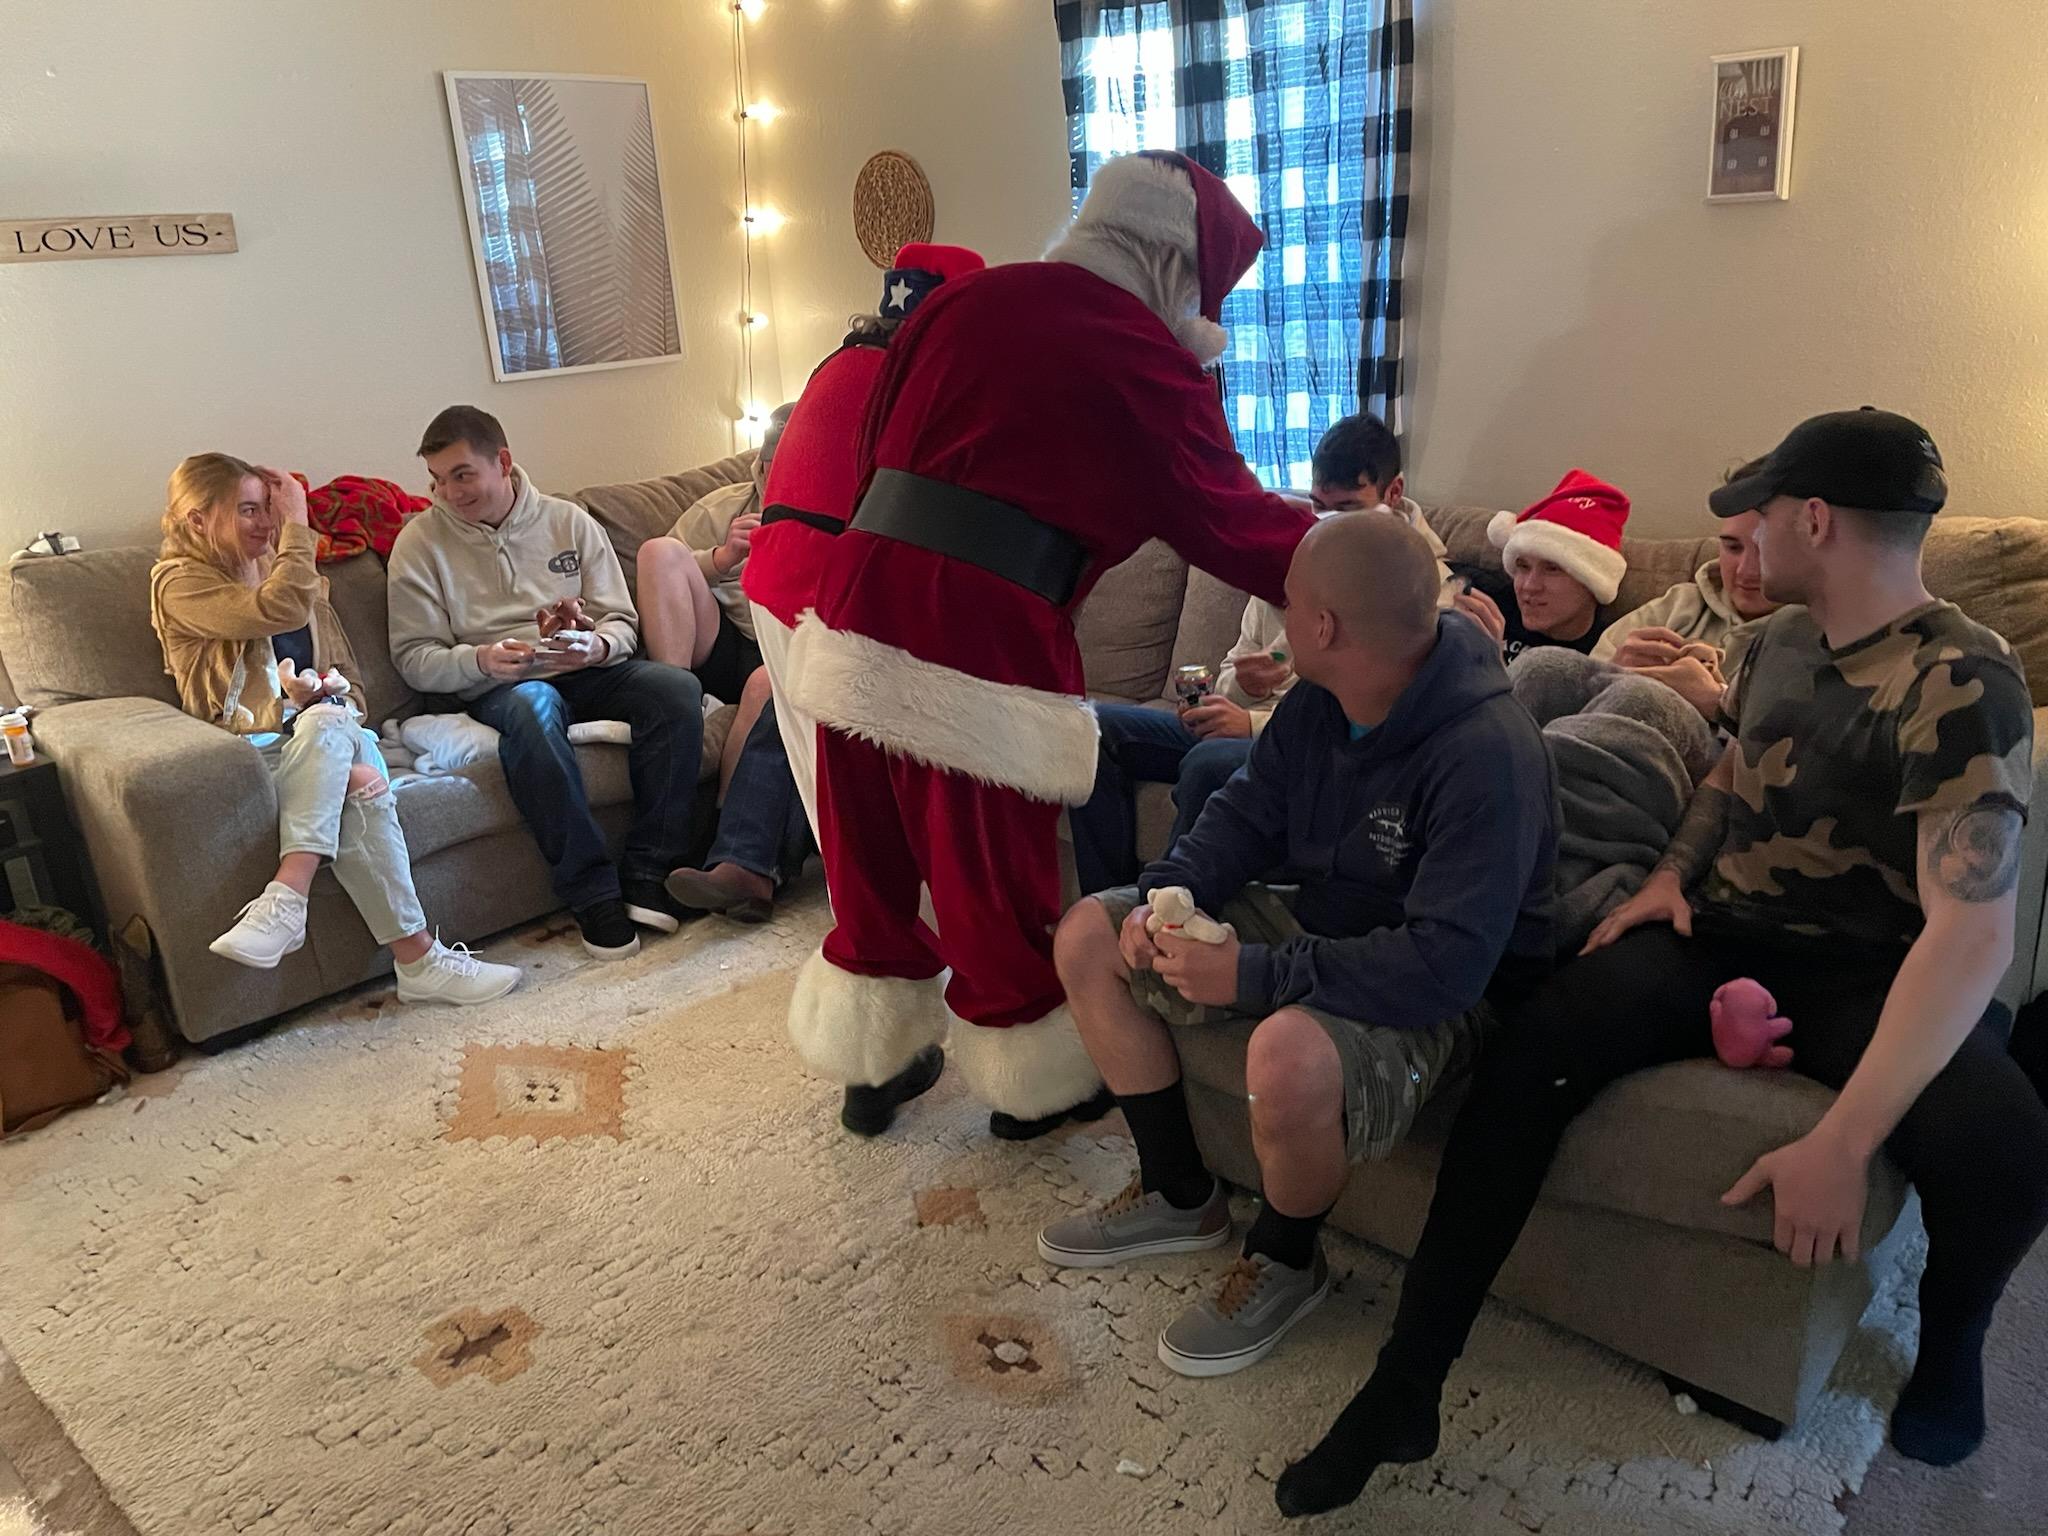 Santa handing out gifts